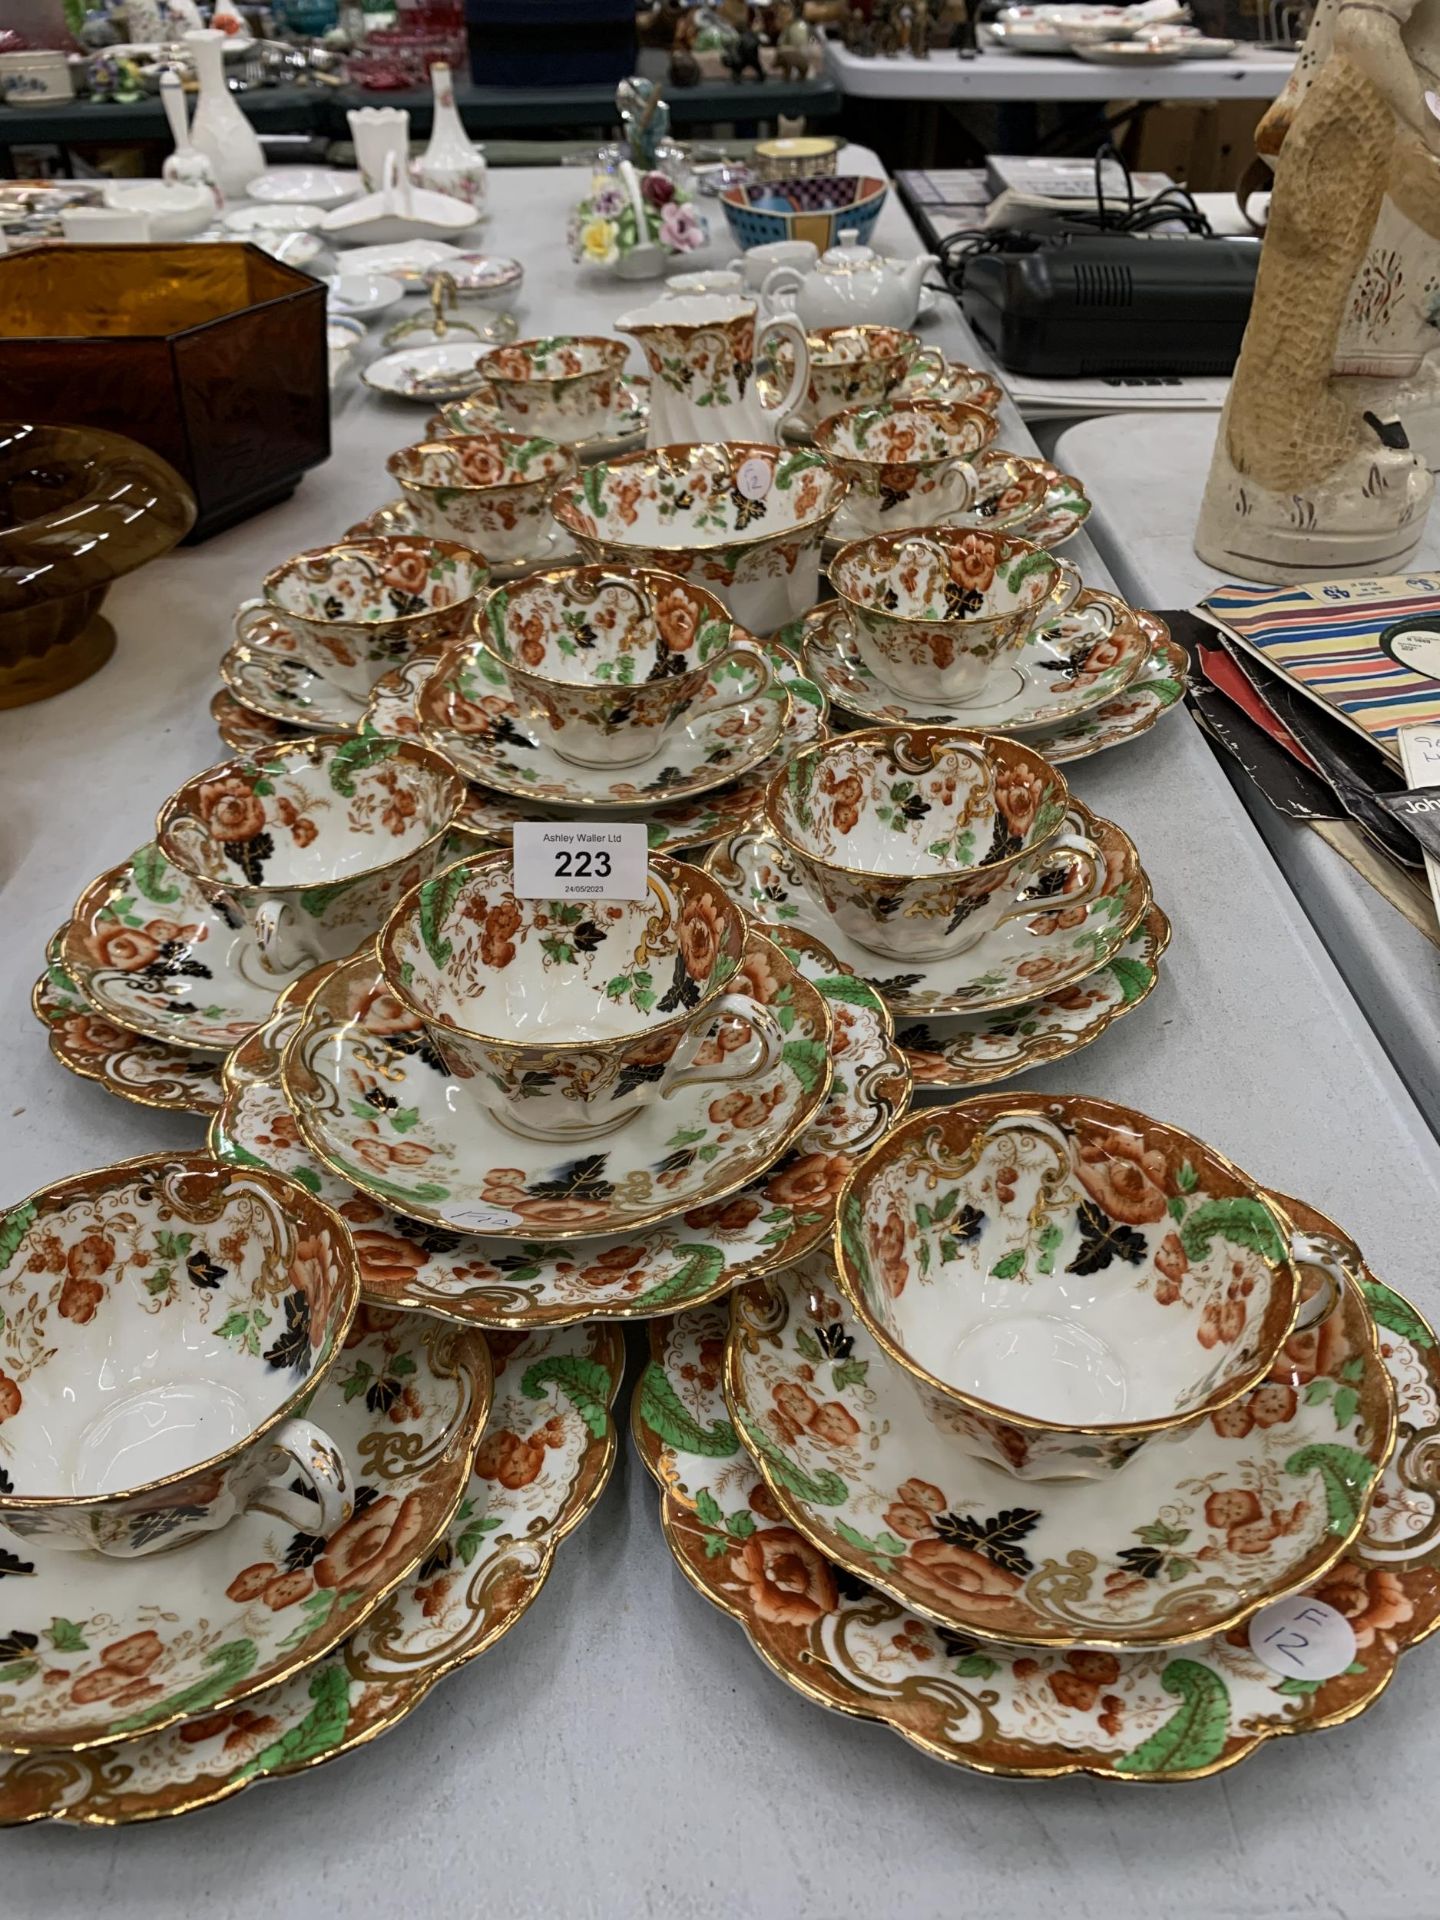 A LARGE QUANTITY OF ROYAL WINDSOR CHINA CUPS, SAUCERS AND SIDE PLATES PLUS A CREAM JUG AND SUGAR